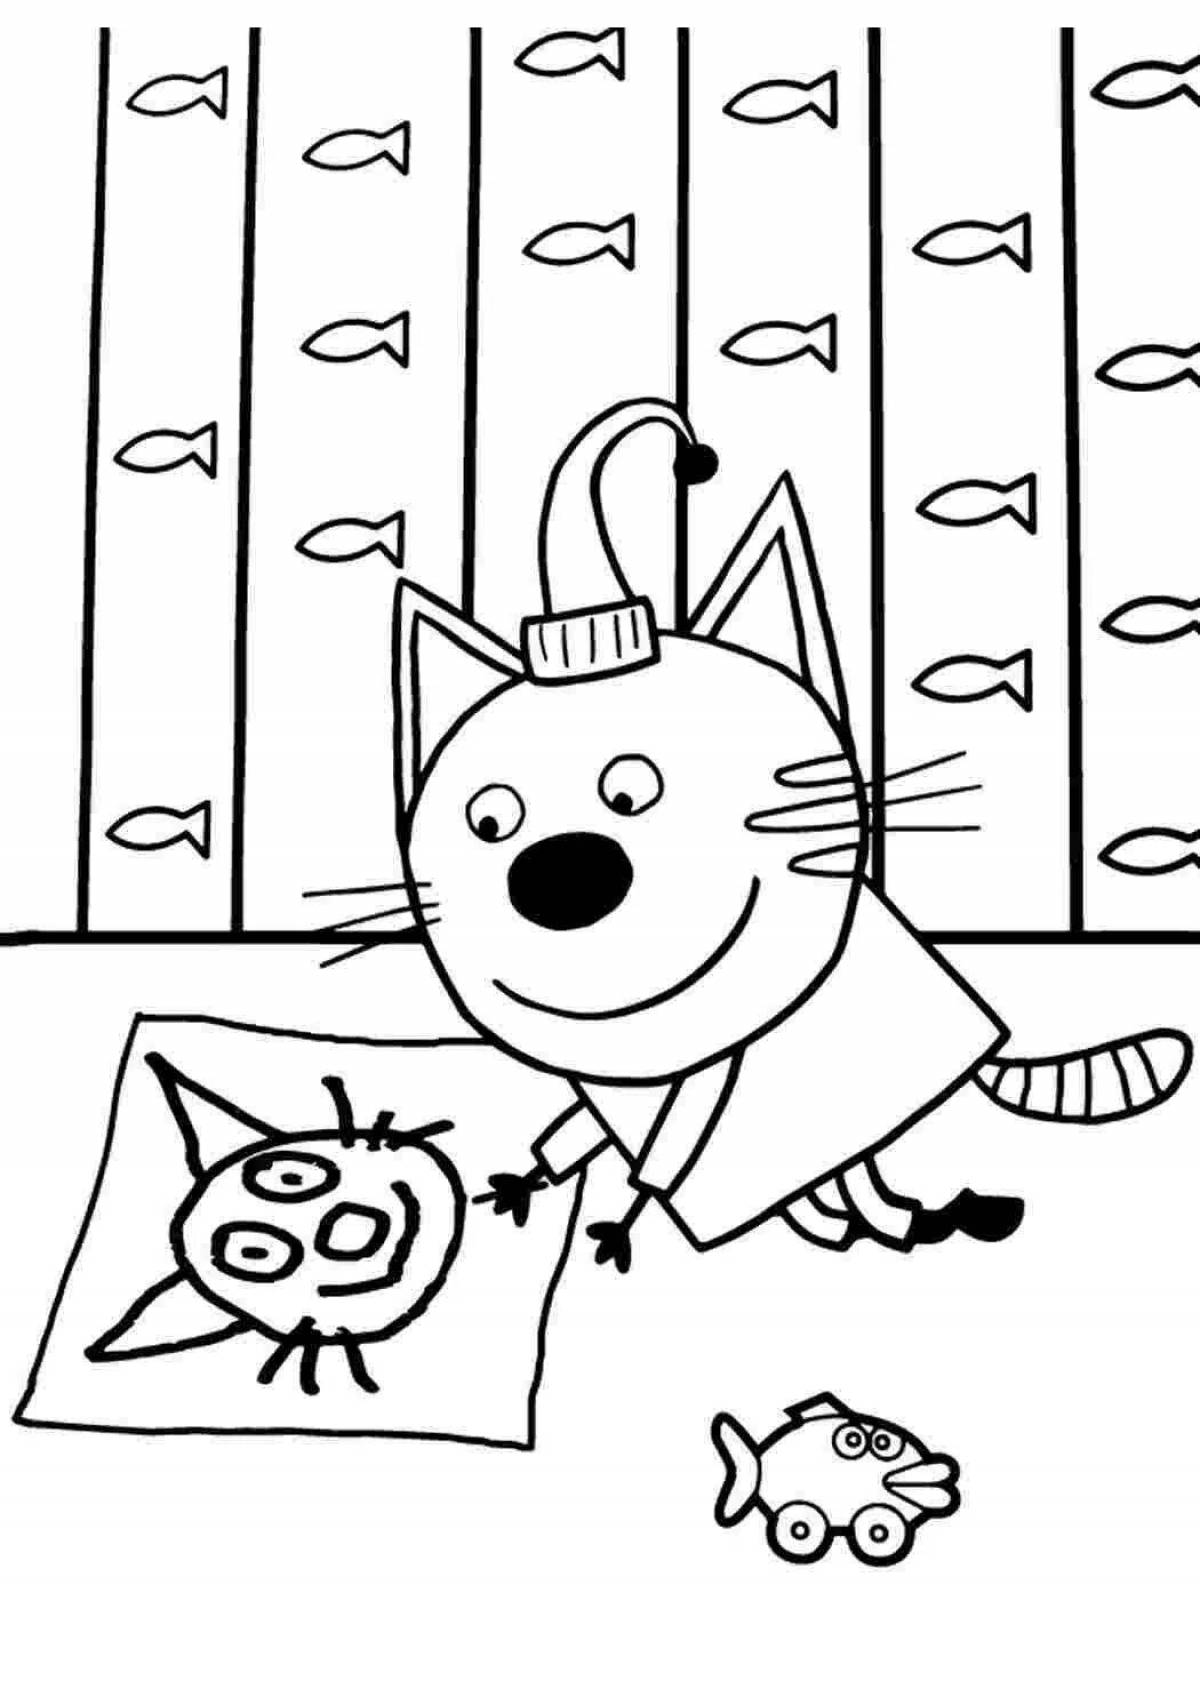 Fairytale coloring for girls 3 years old 3 cats